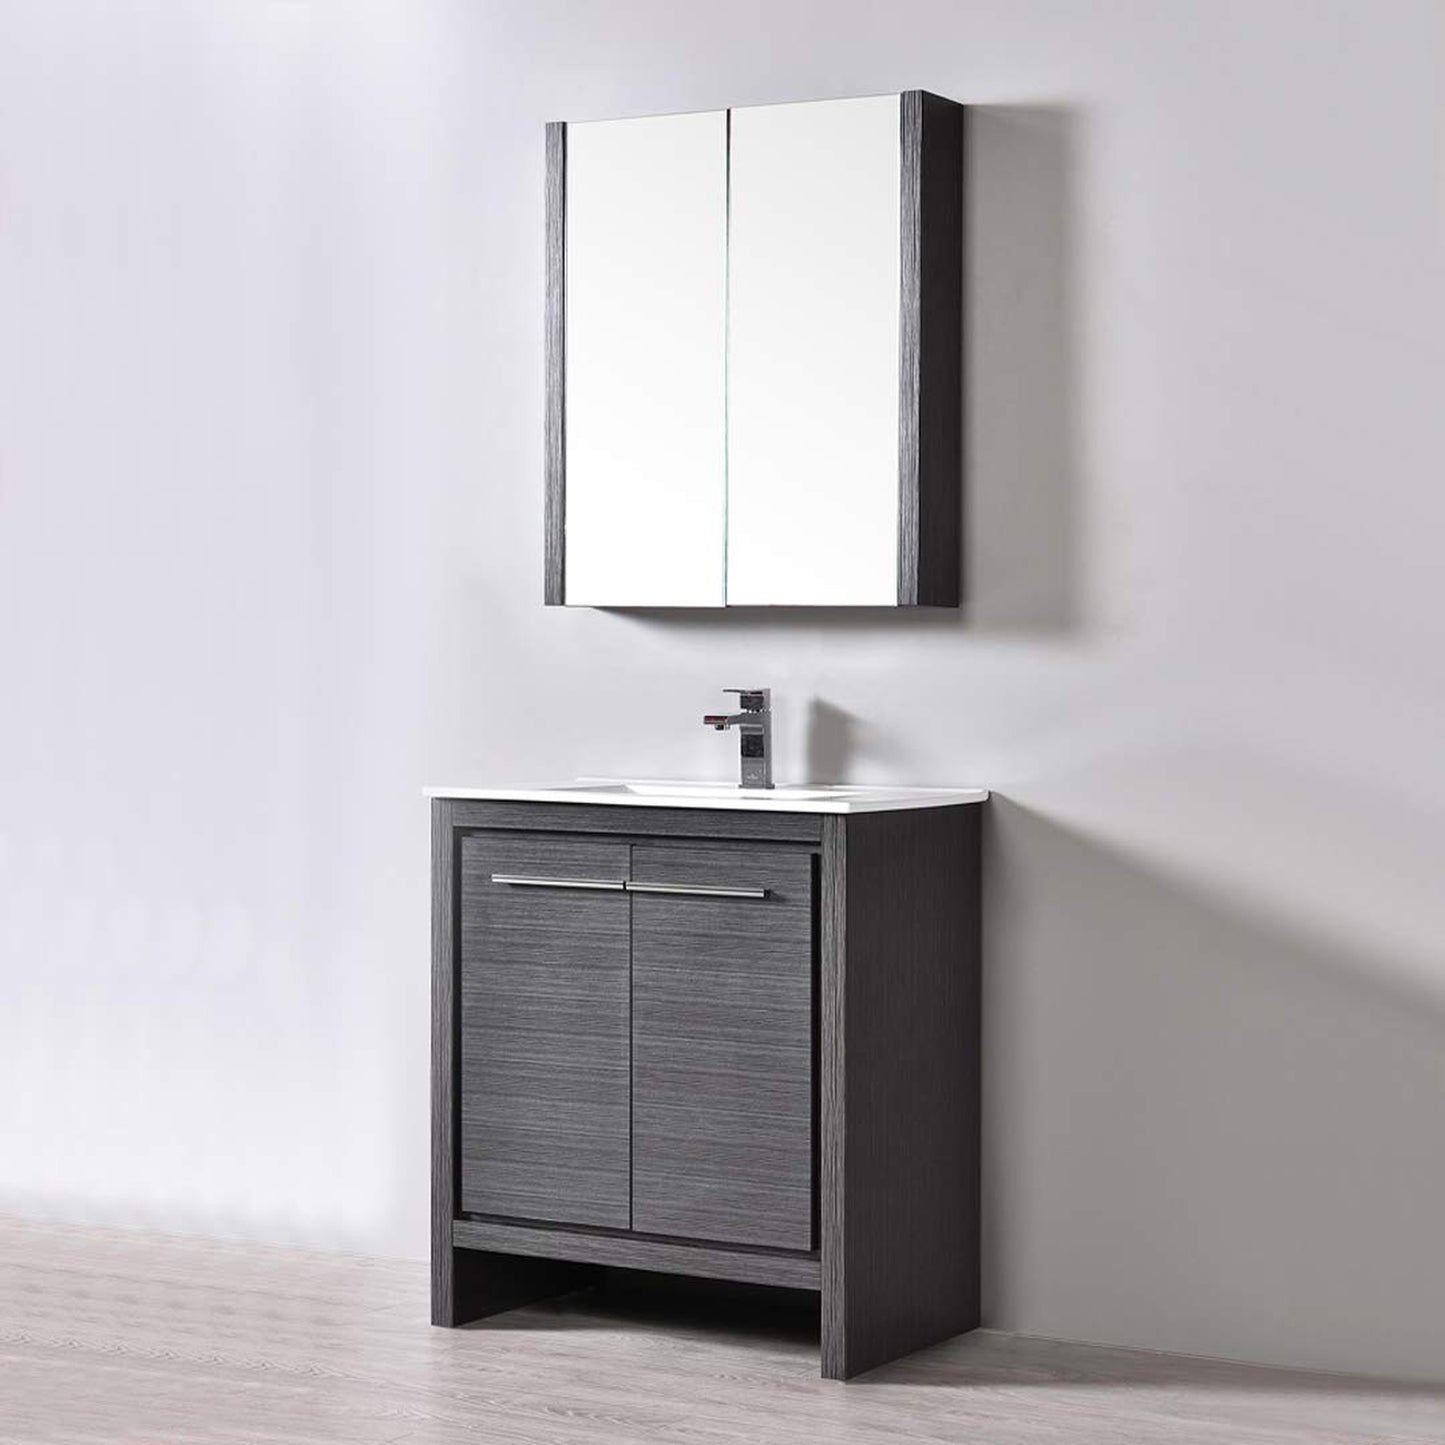 Blossom Milan 30" 2-Door 1-Drawer Silver Gray Freestanding Vanity With Ceramic Drop-In Single Sink And Mirrored Medicine Cabinet